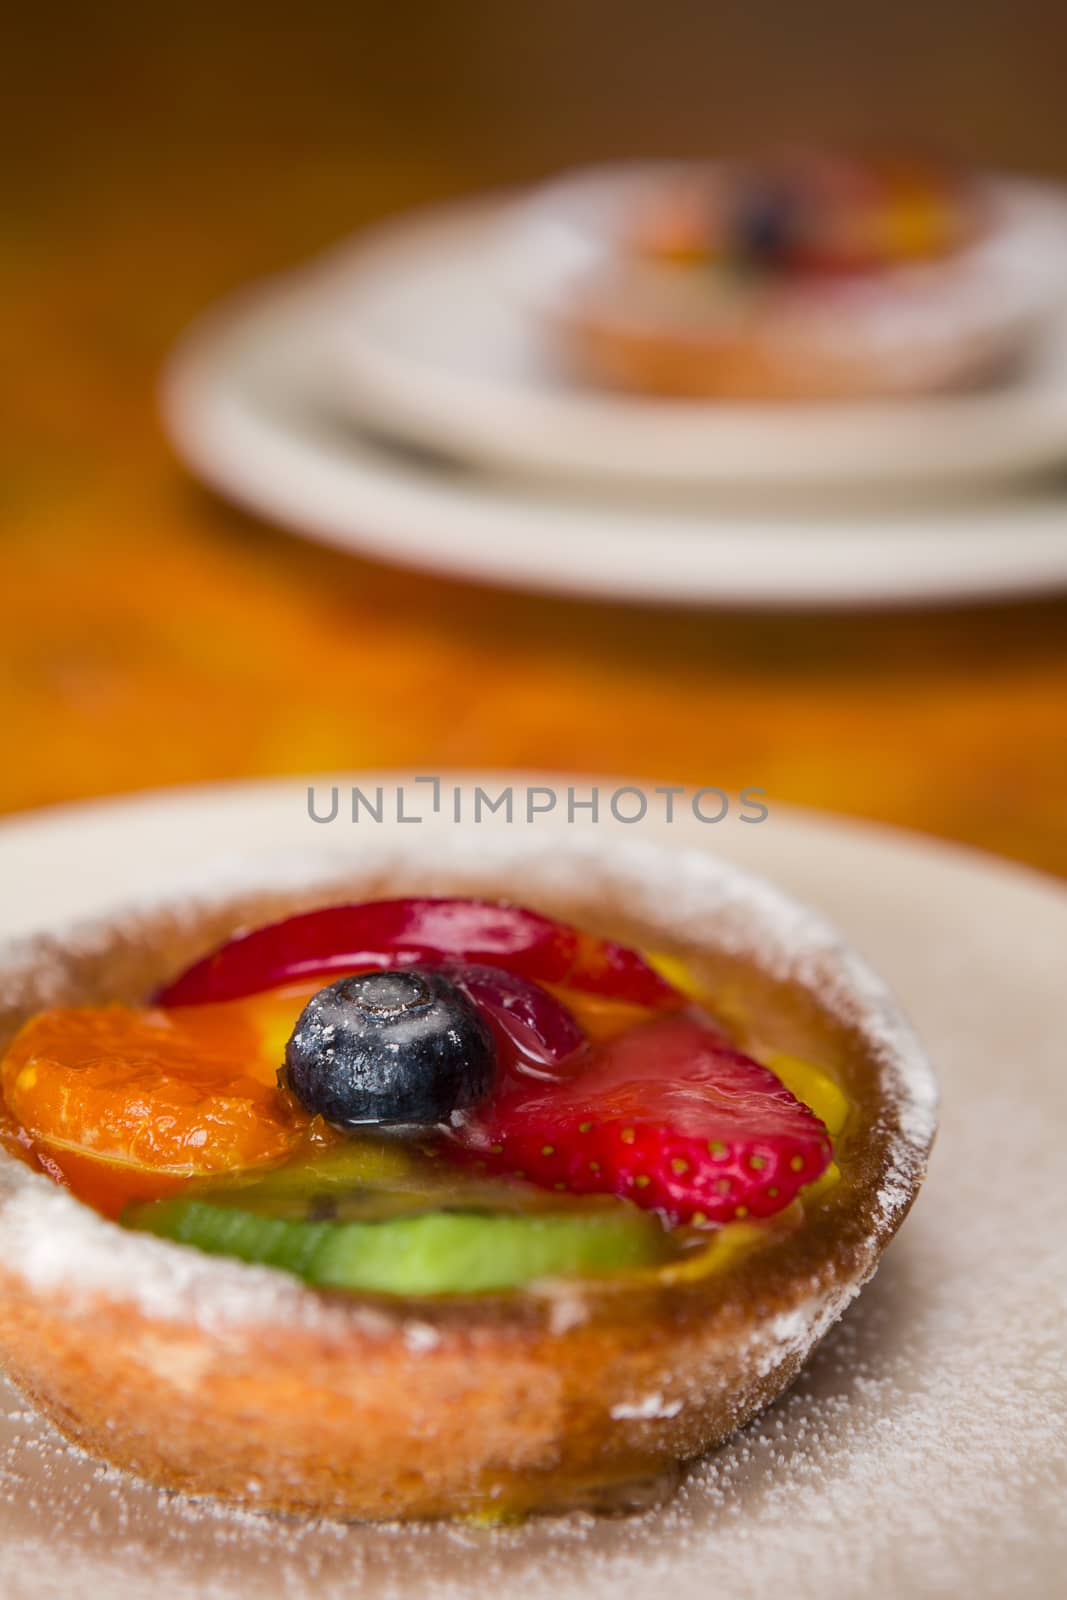 Fruit tart on a plate over a colored table